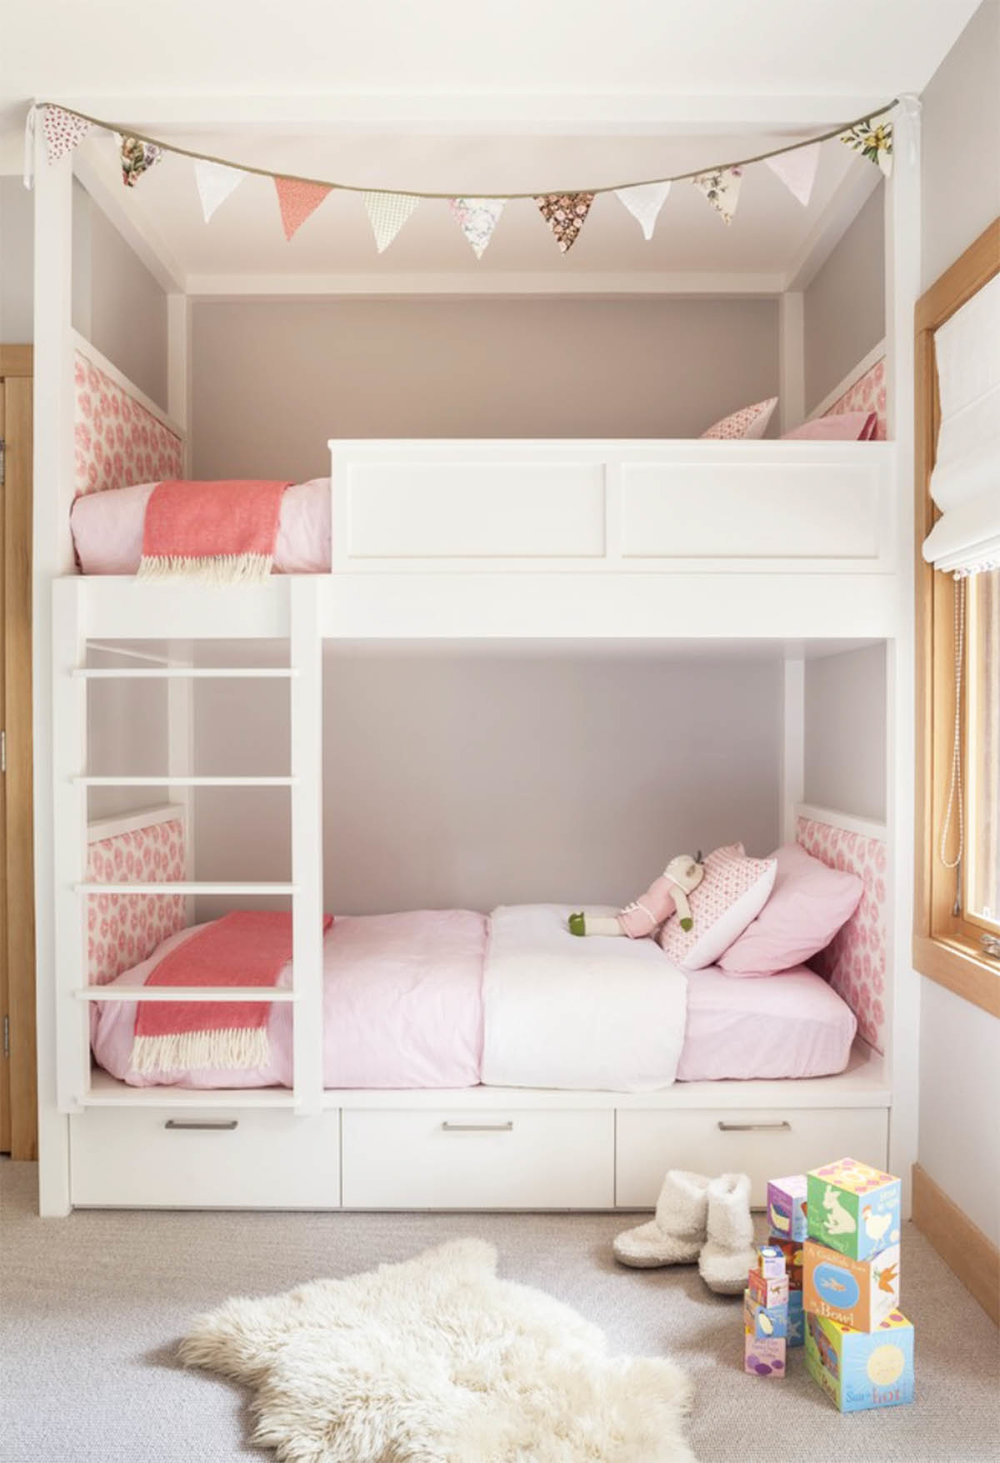 Shared Kids Rooms With Bunk Beds, Kids Room With Bunk Beds